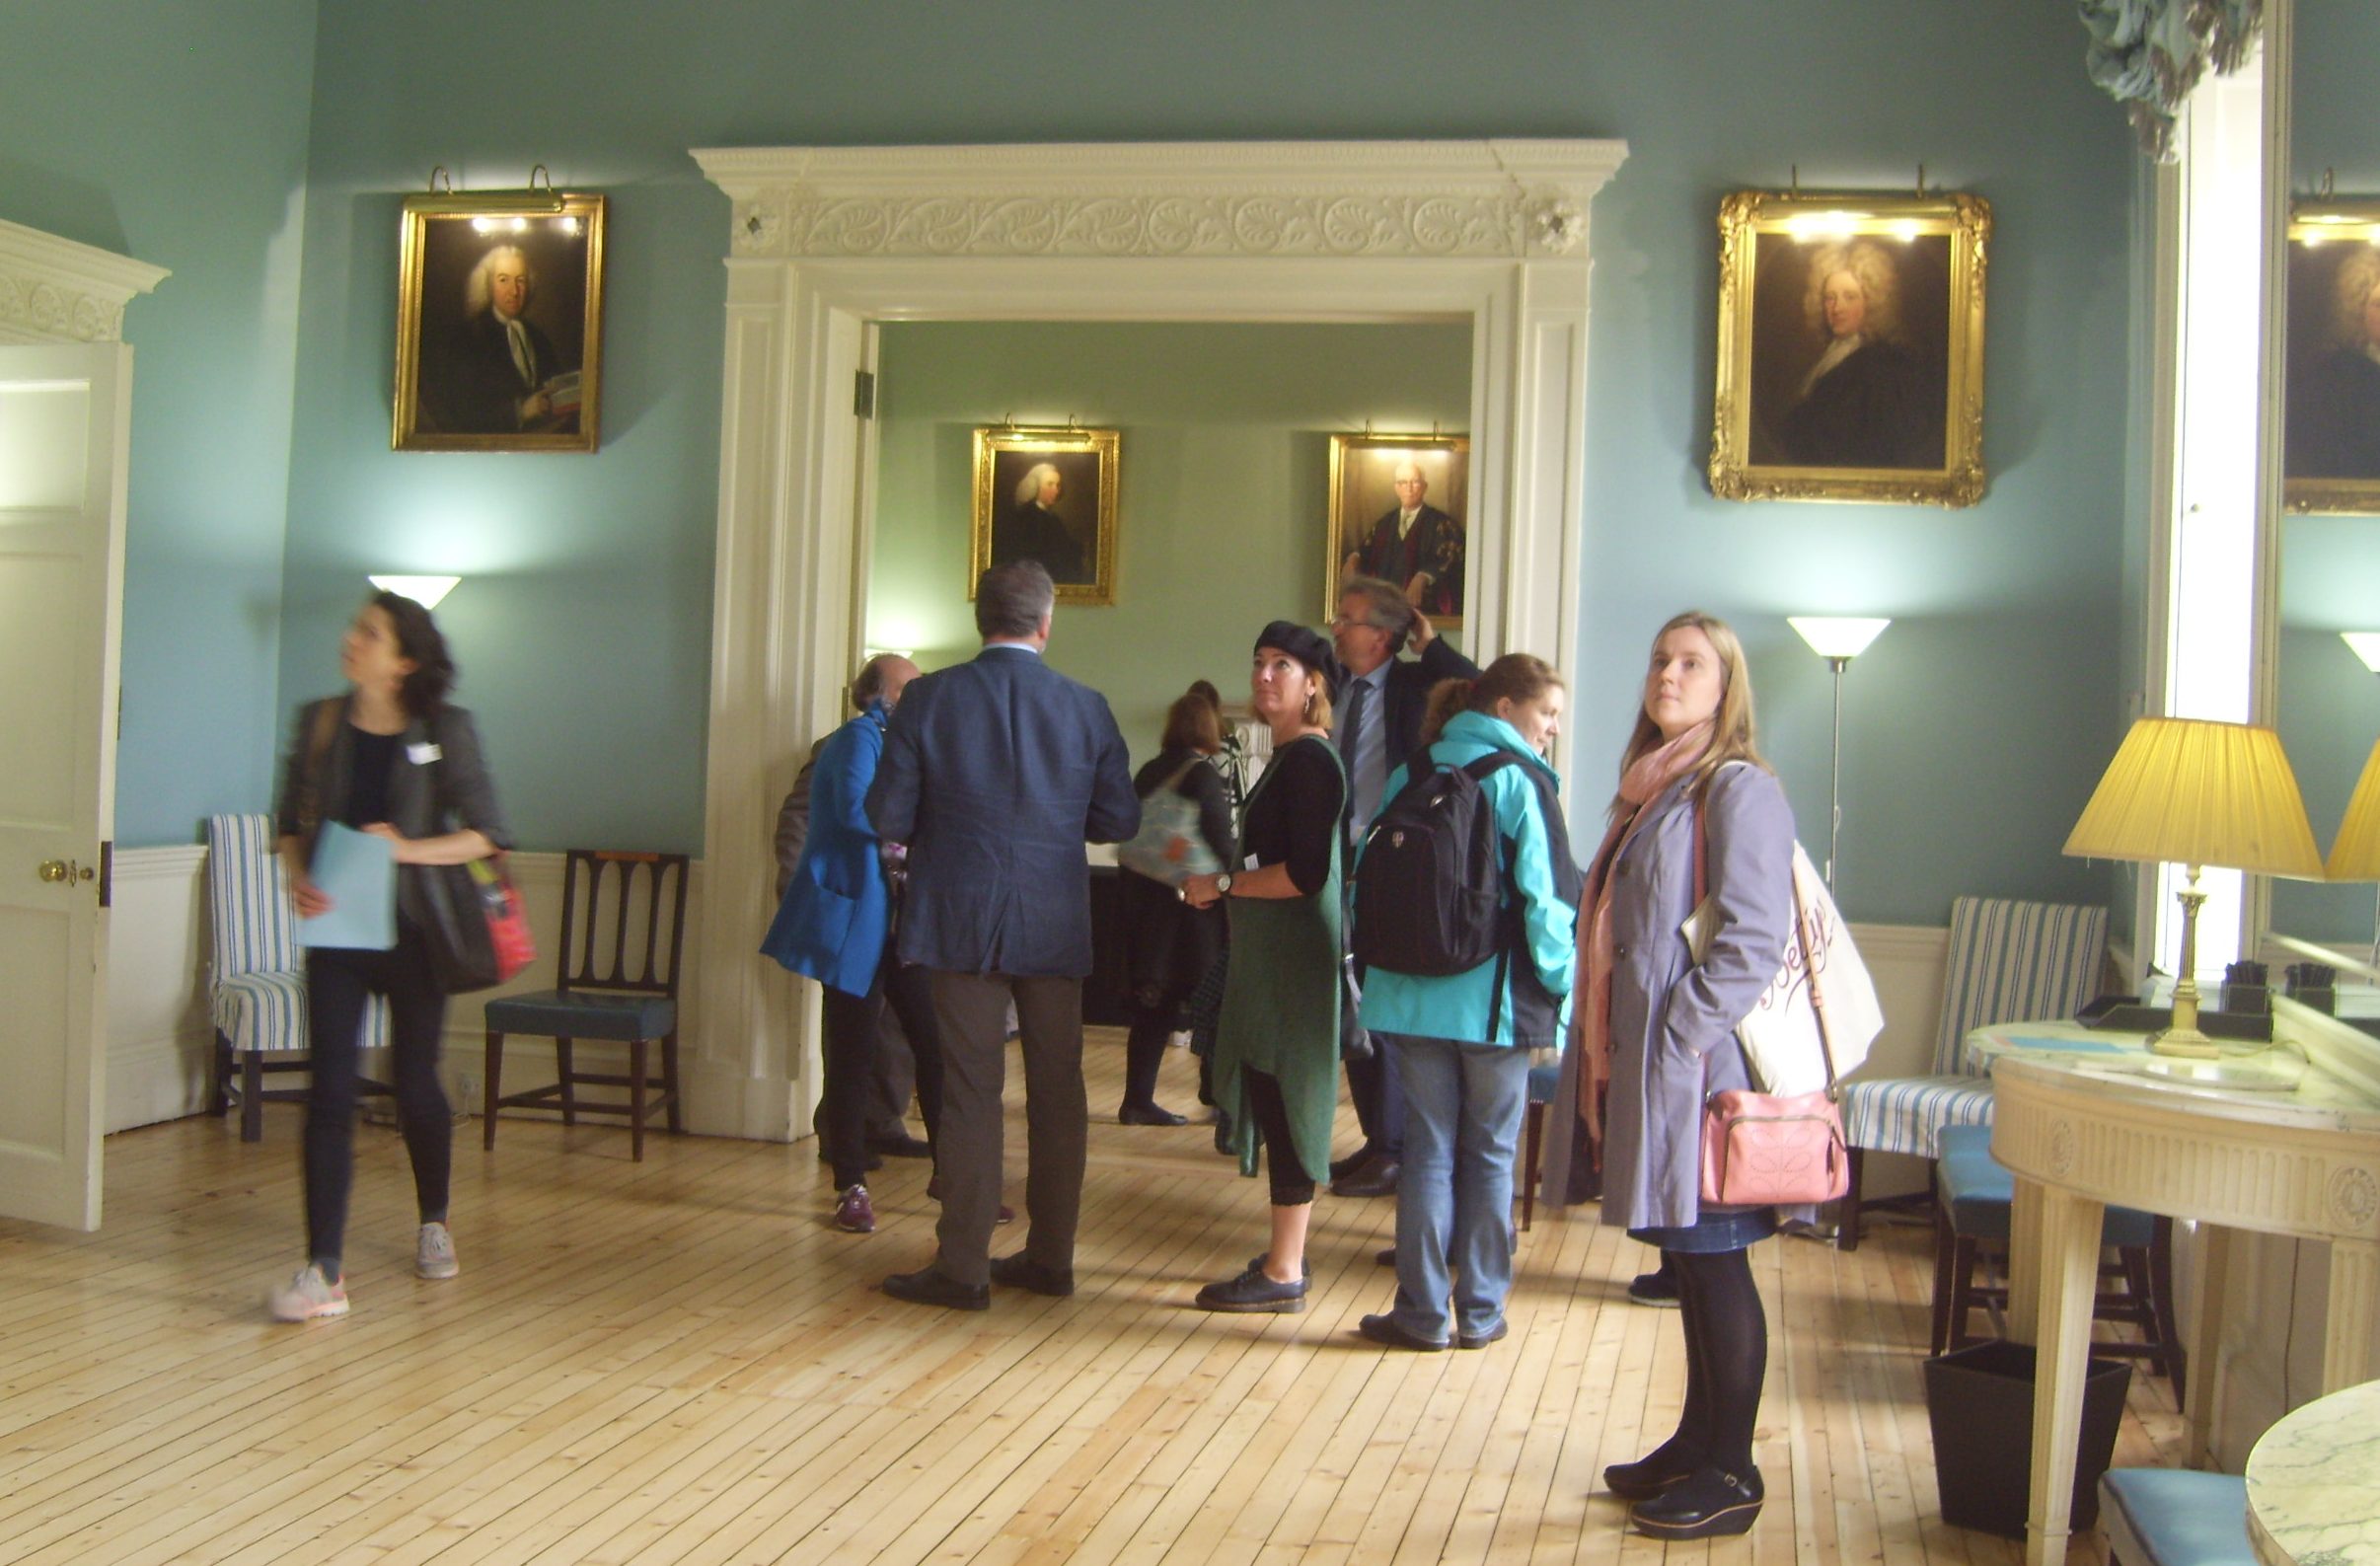 Members of the 'Understanding British Portraits' network at the Royal College of Physicians in Edinburgh, part of the Portrait Collections in Edinburgh event 18 September 2015